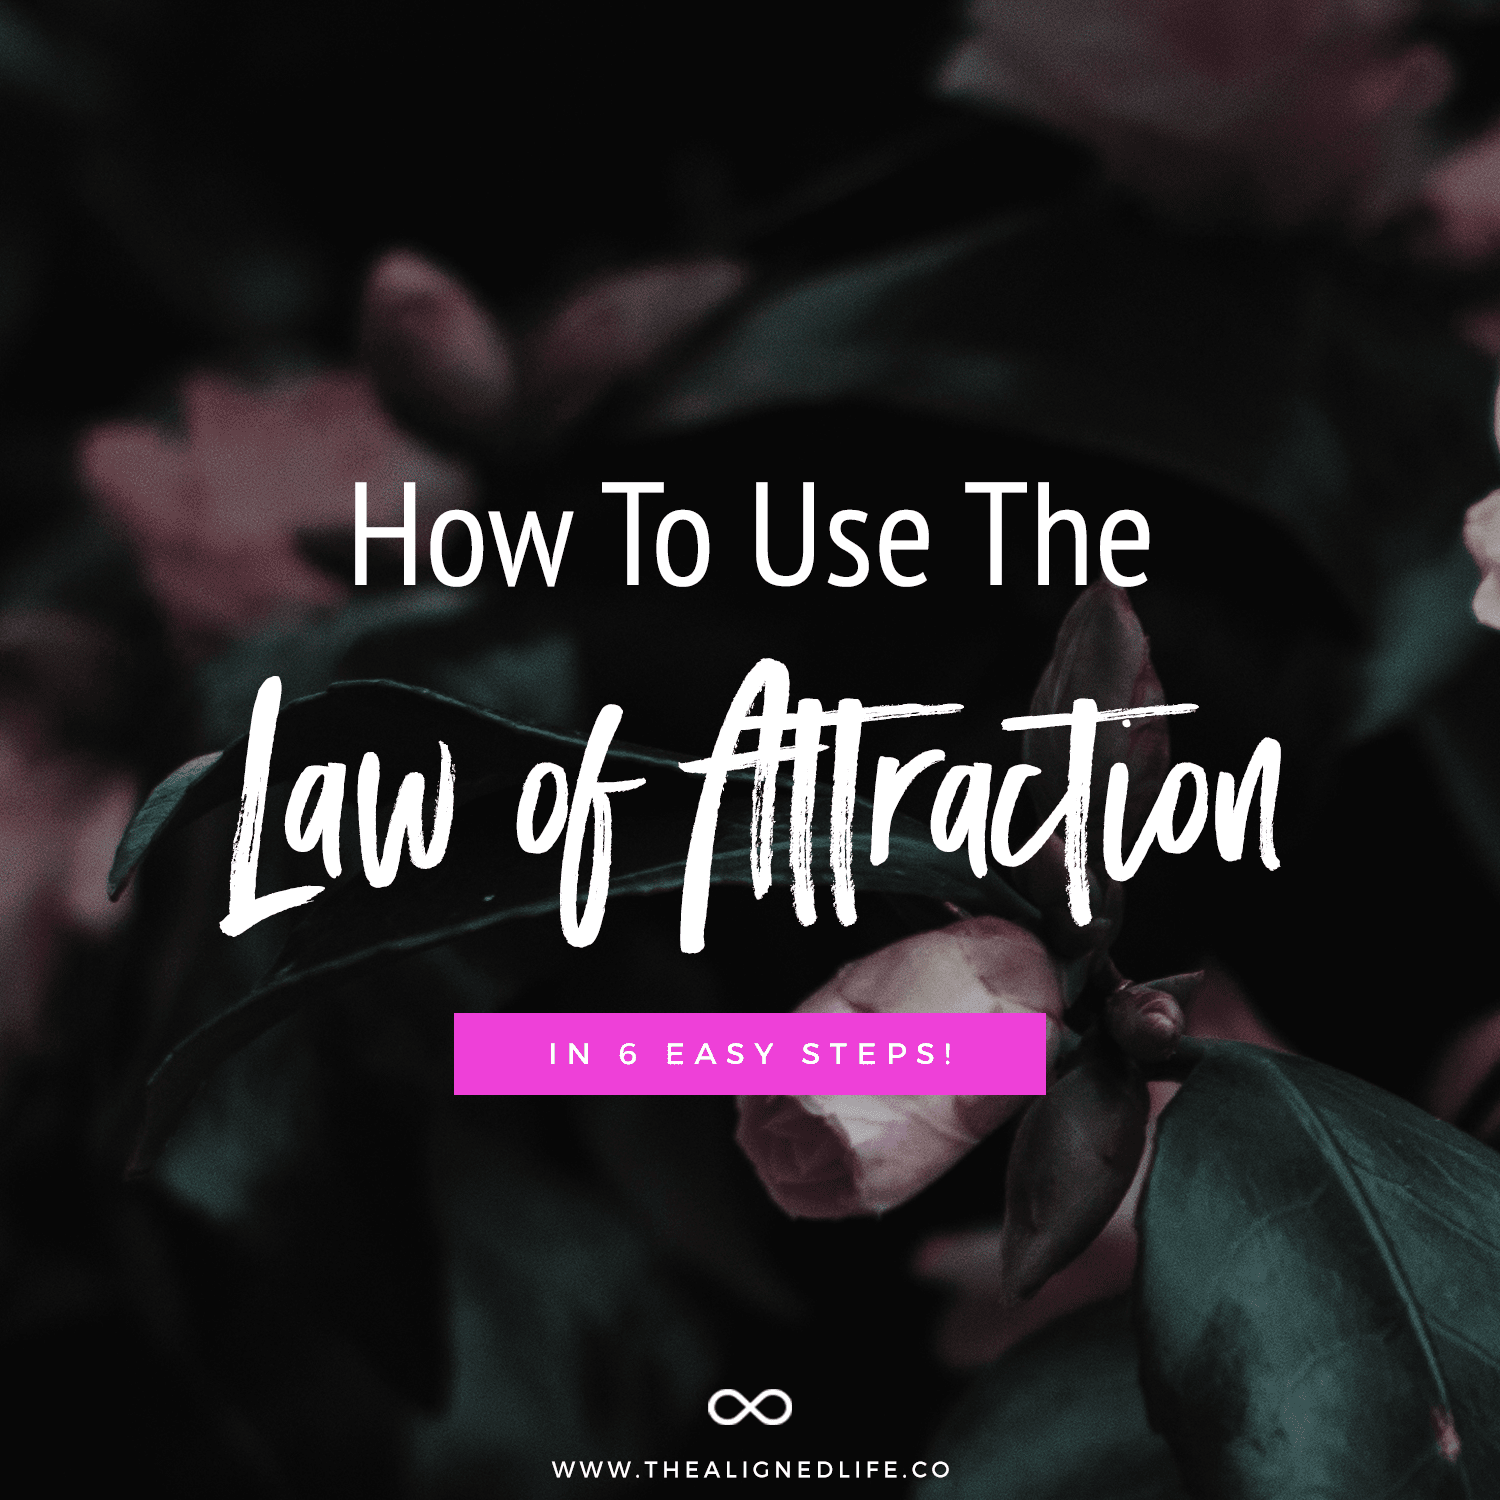 How To Use The Law of Attraction In 6 Easy Steps